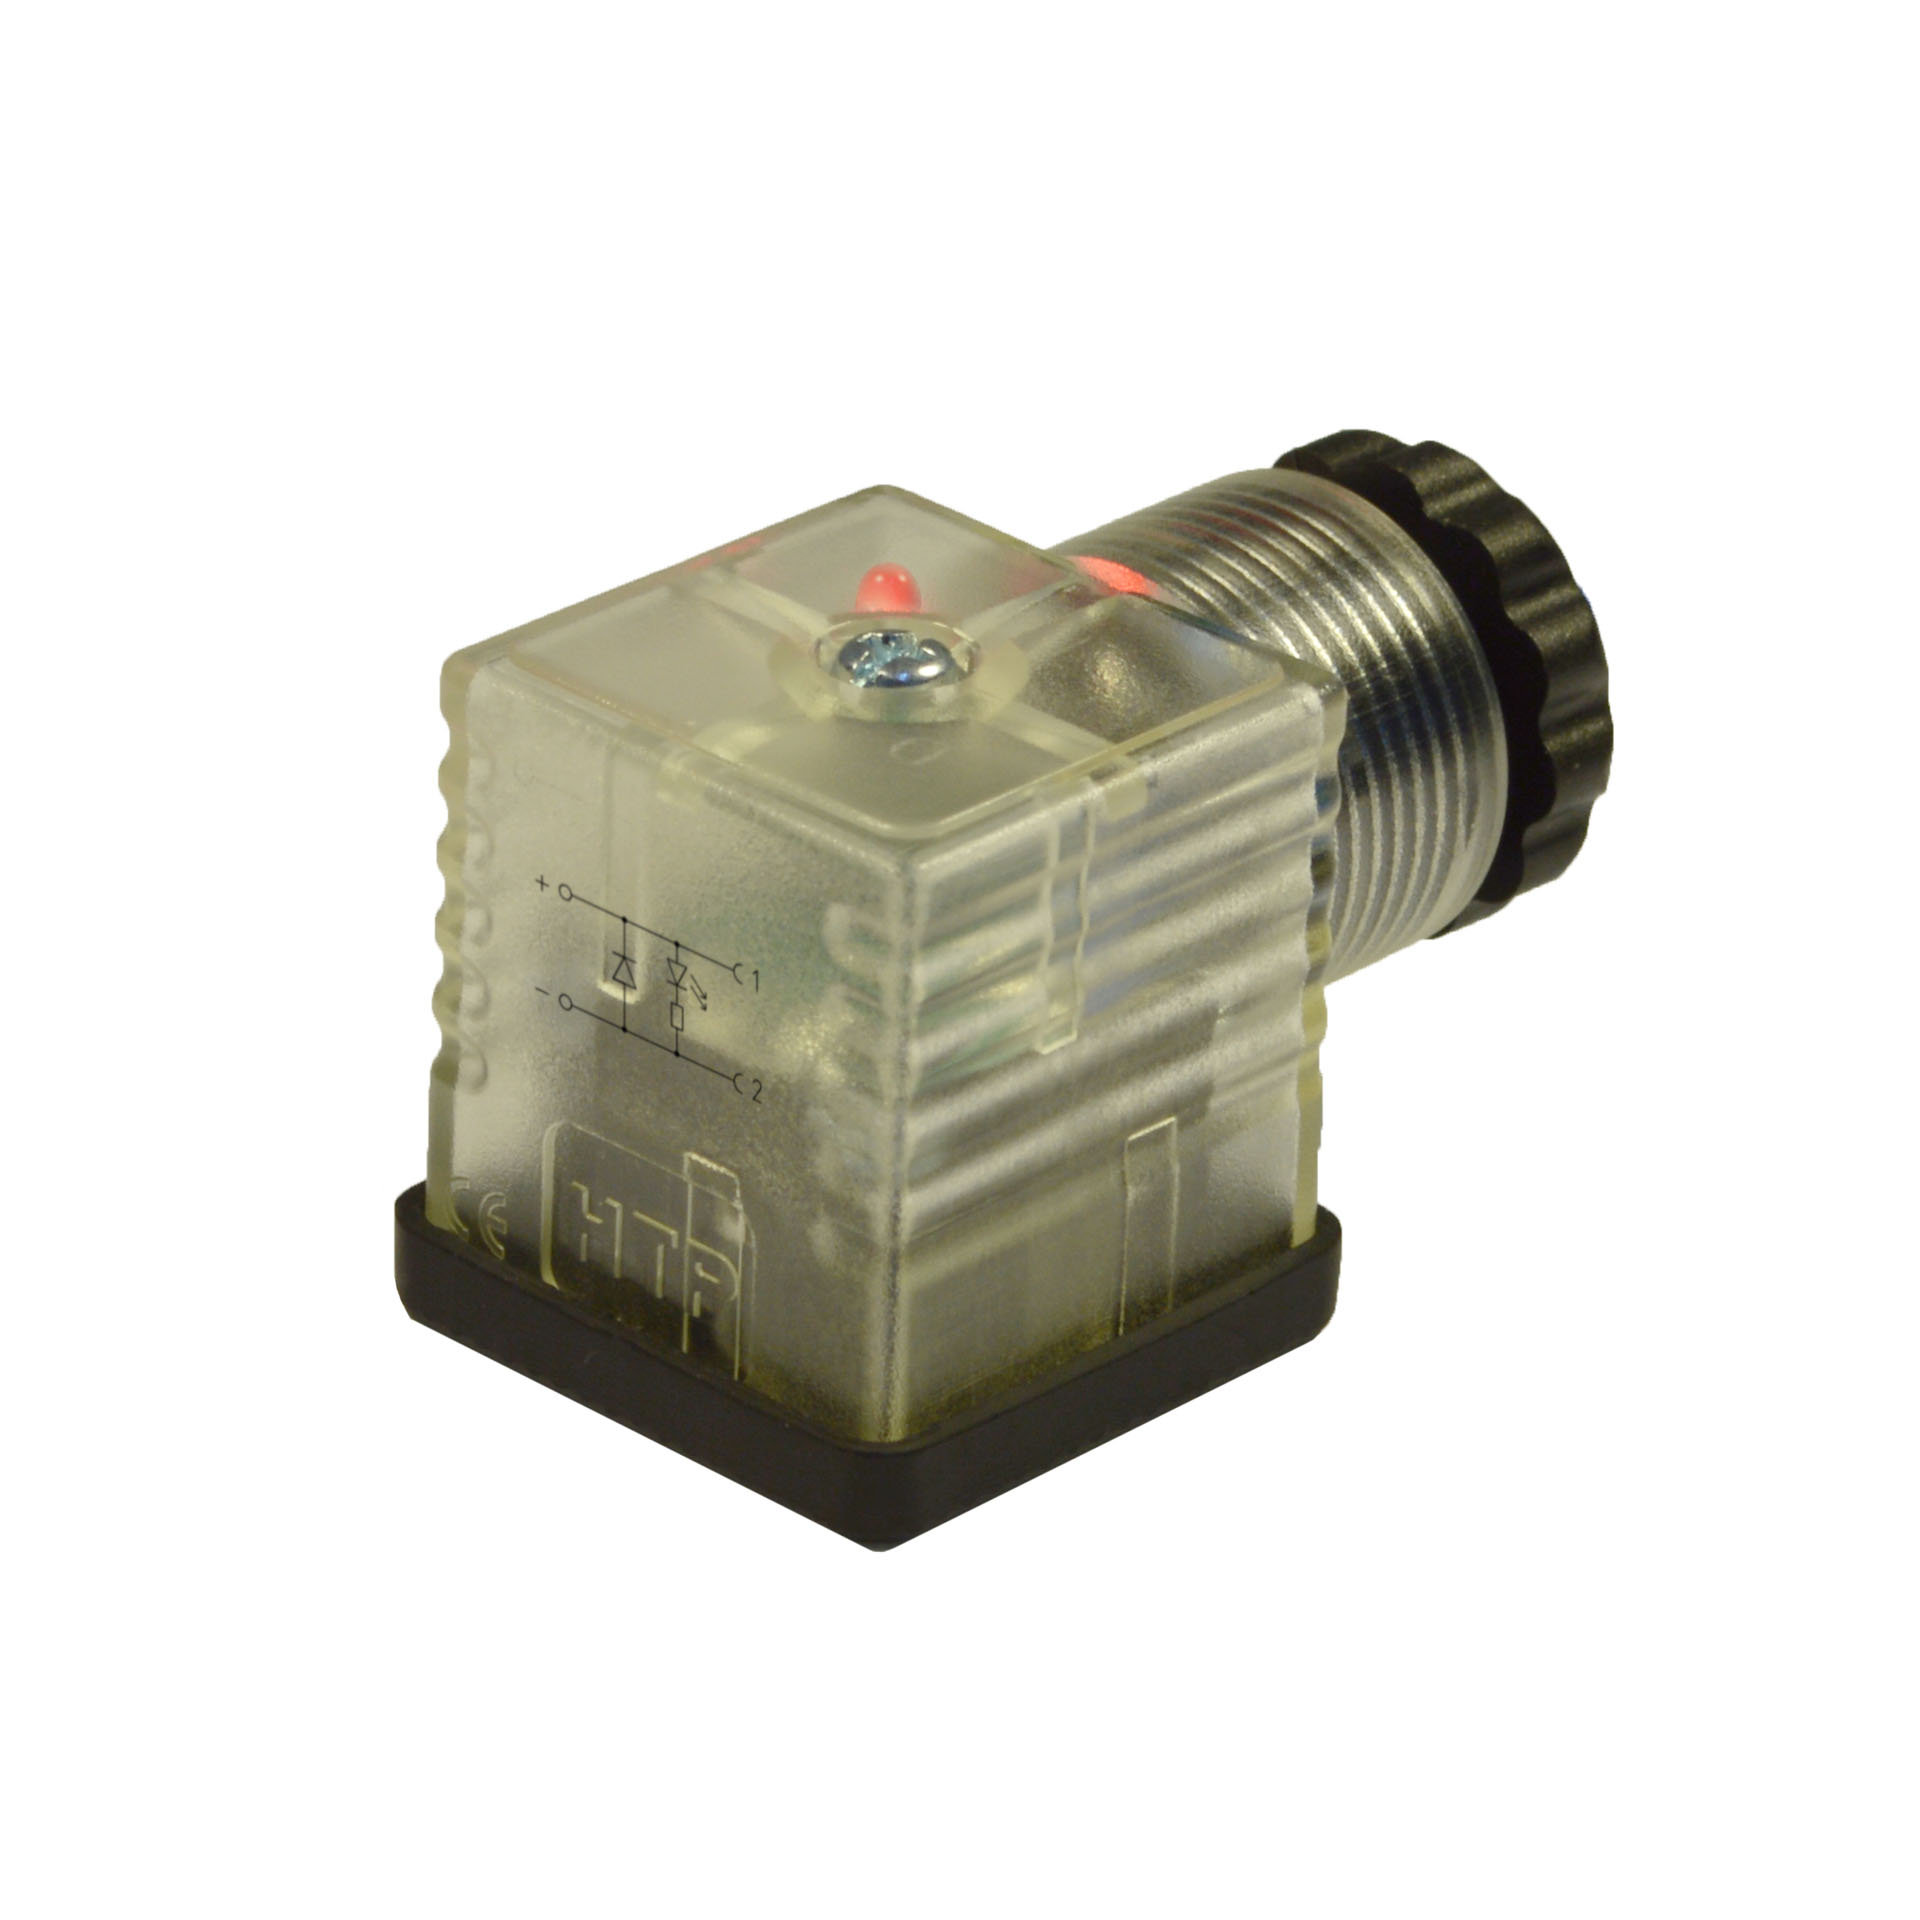 EN175301-803(typeA)field attachable,2p+PE(h.12),Red LED+diode 2A,24VDC,PG9/11unif.